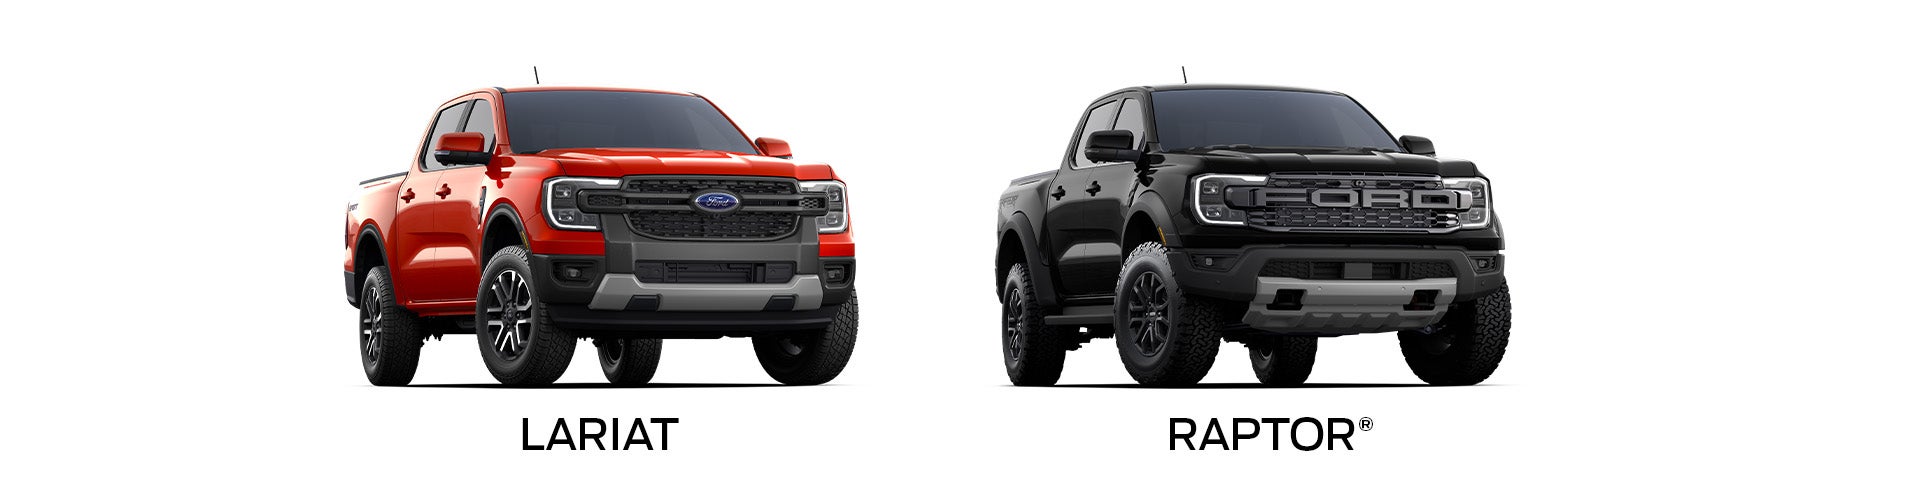 2024 Ford Ranger First Look: Way More America, Truck Yeah! Than